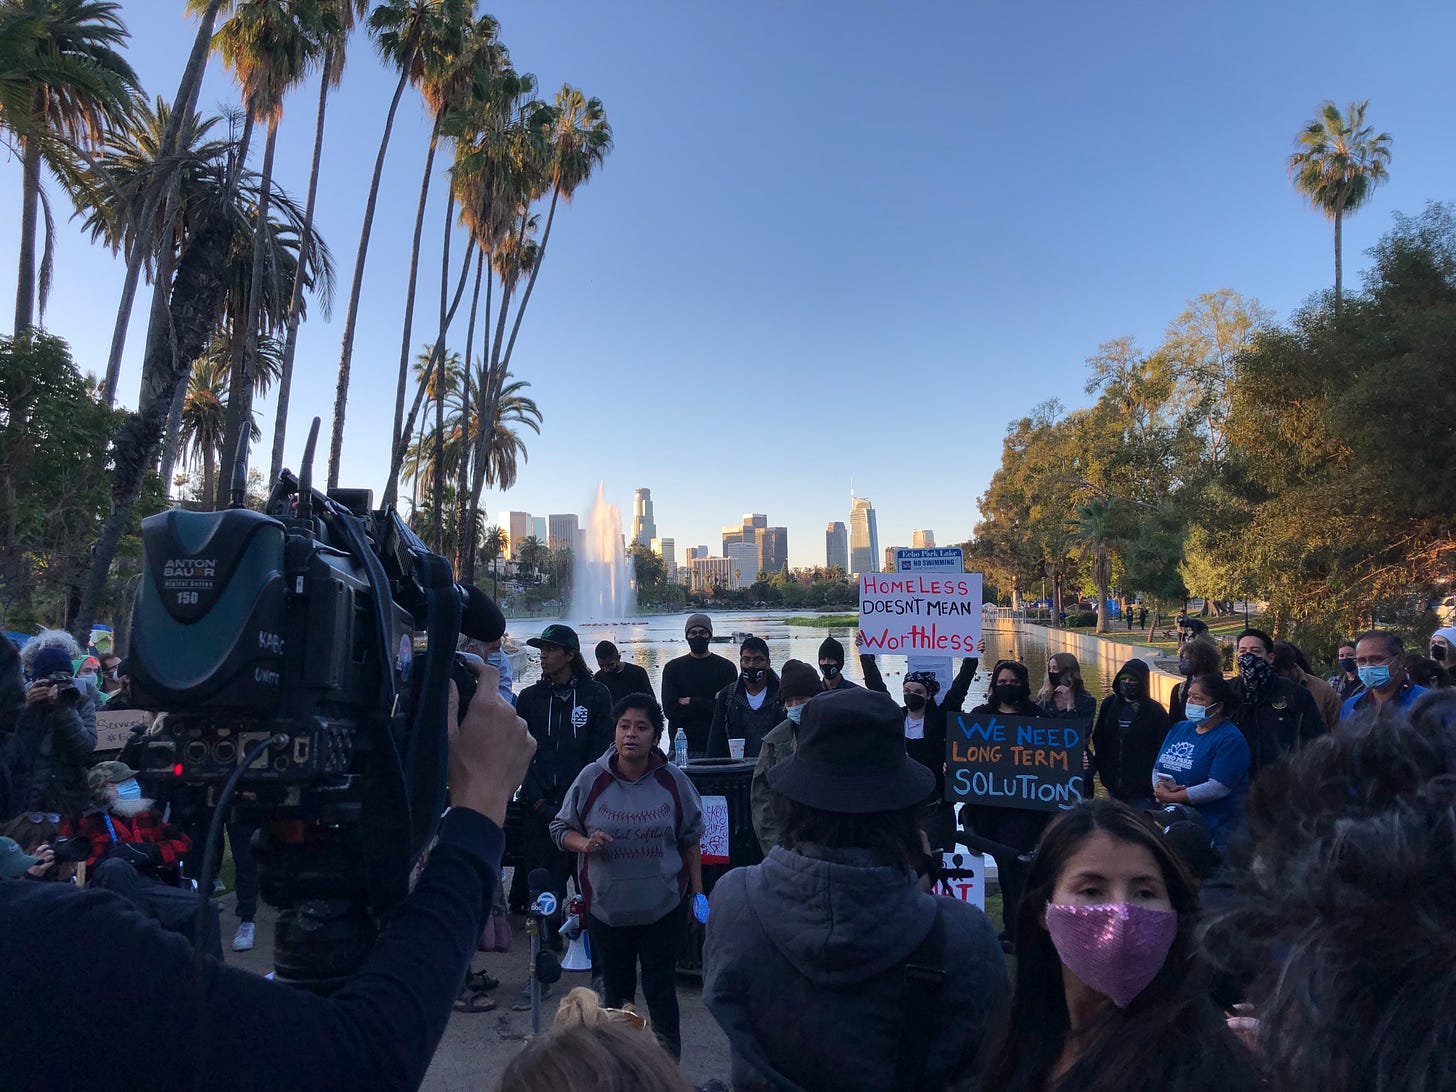 News cameras videotape a crowd of people holding a press conference. Palm trees and skyscrapers in the background.